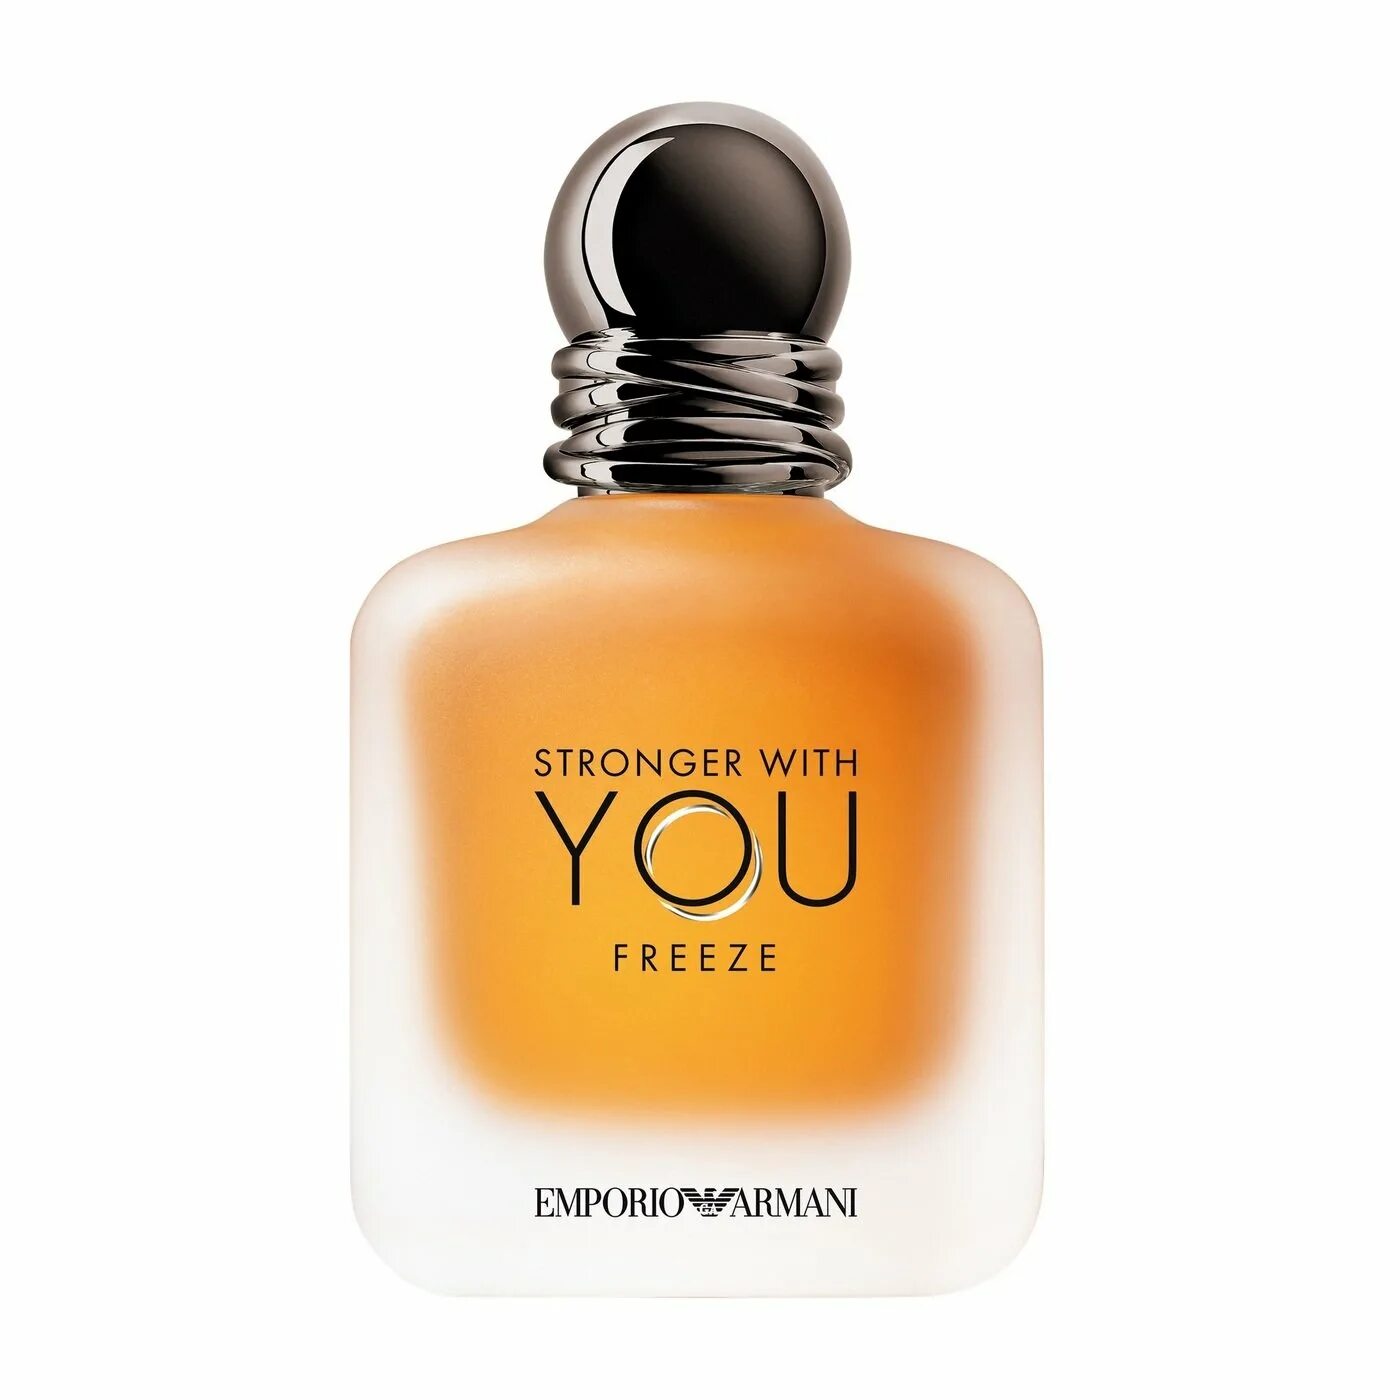 Stronger with you only. Emporio Armani stronger with you 100ml. Emporio Armani stronger with you 100 мл. Эмпорио Армани духи мужские you 100 мл. Туалетная вода Armani Emporio Armani stronger with you.